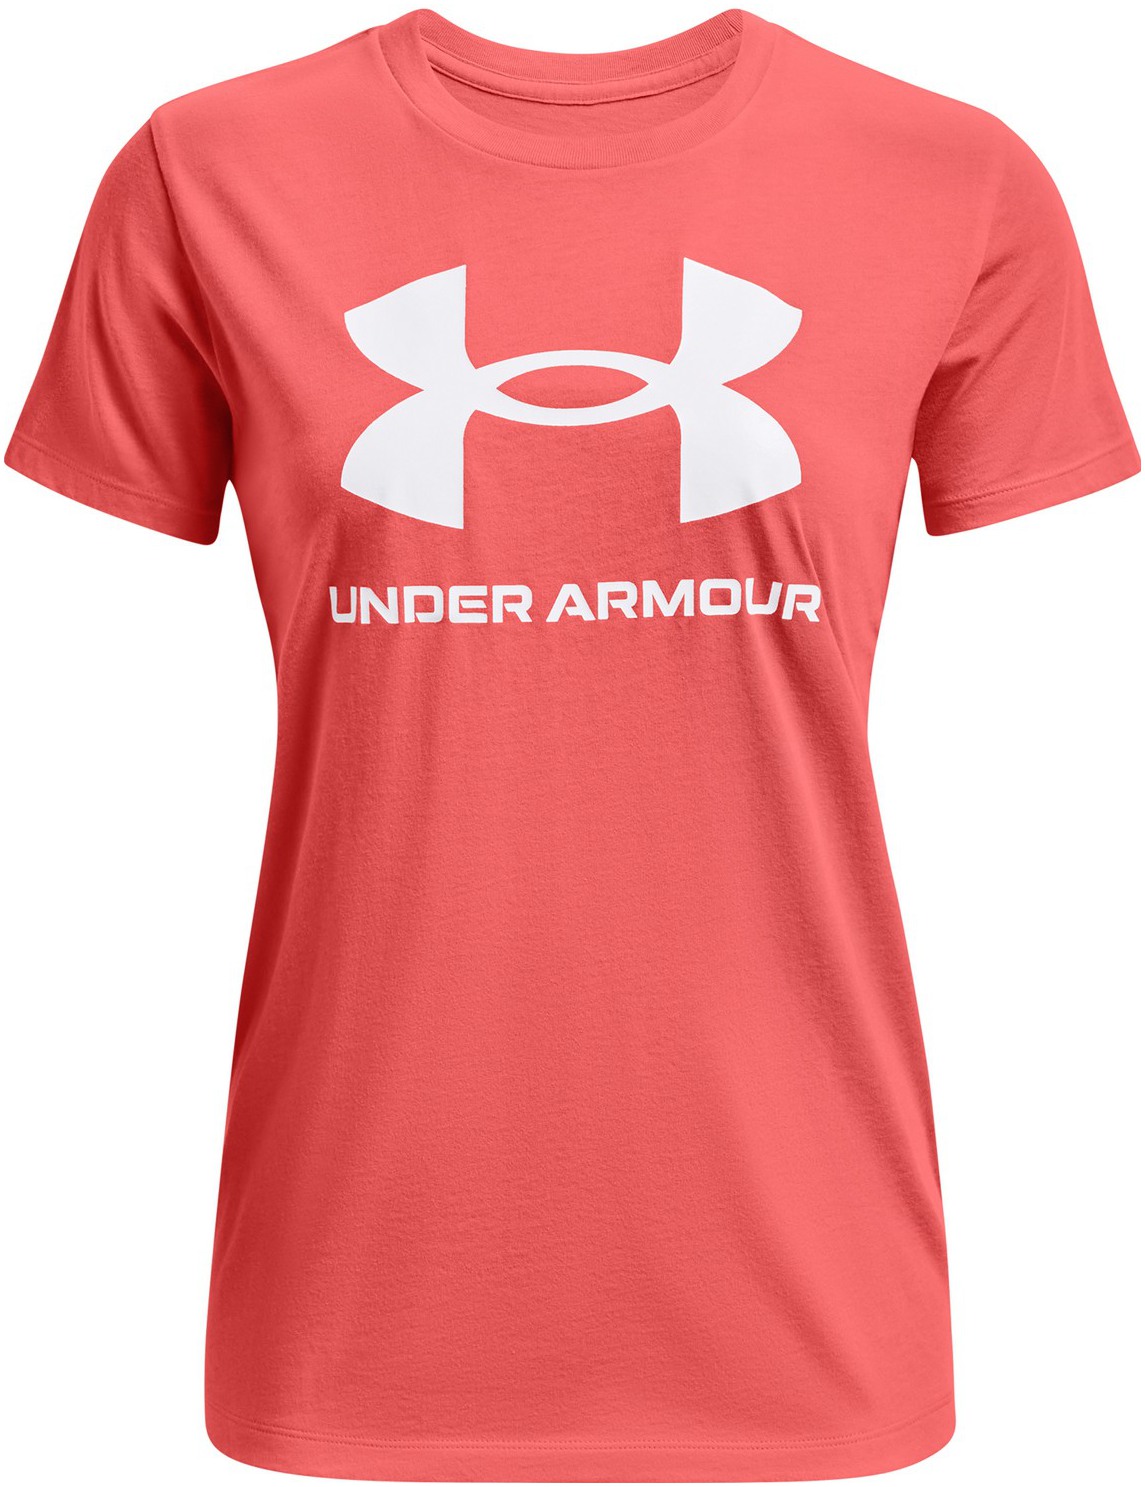 Under Armour  Live Sportstyle Graphic Short Sleeve T Shirt Girls